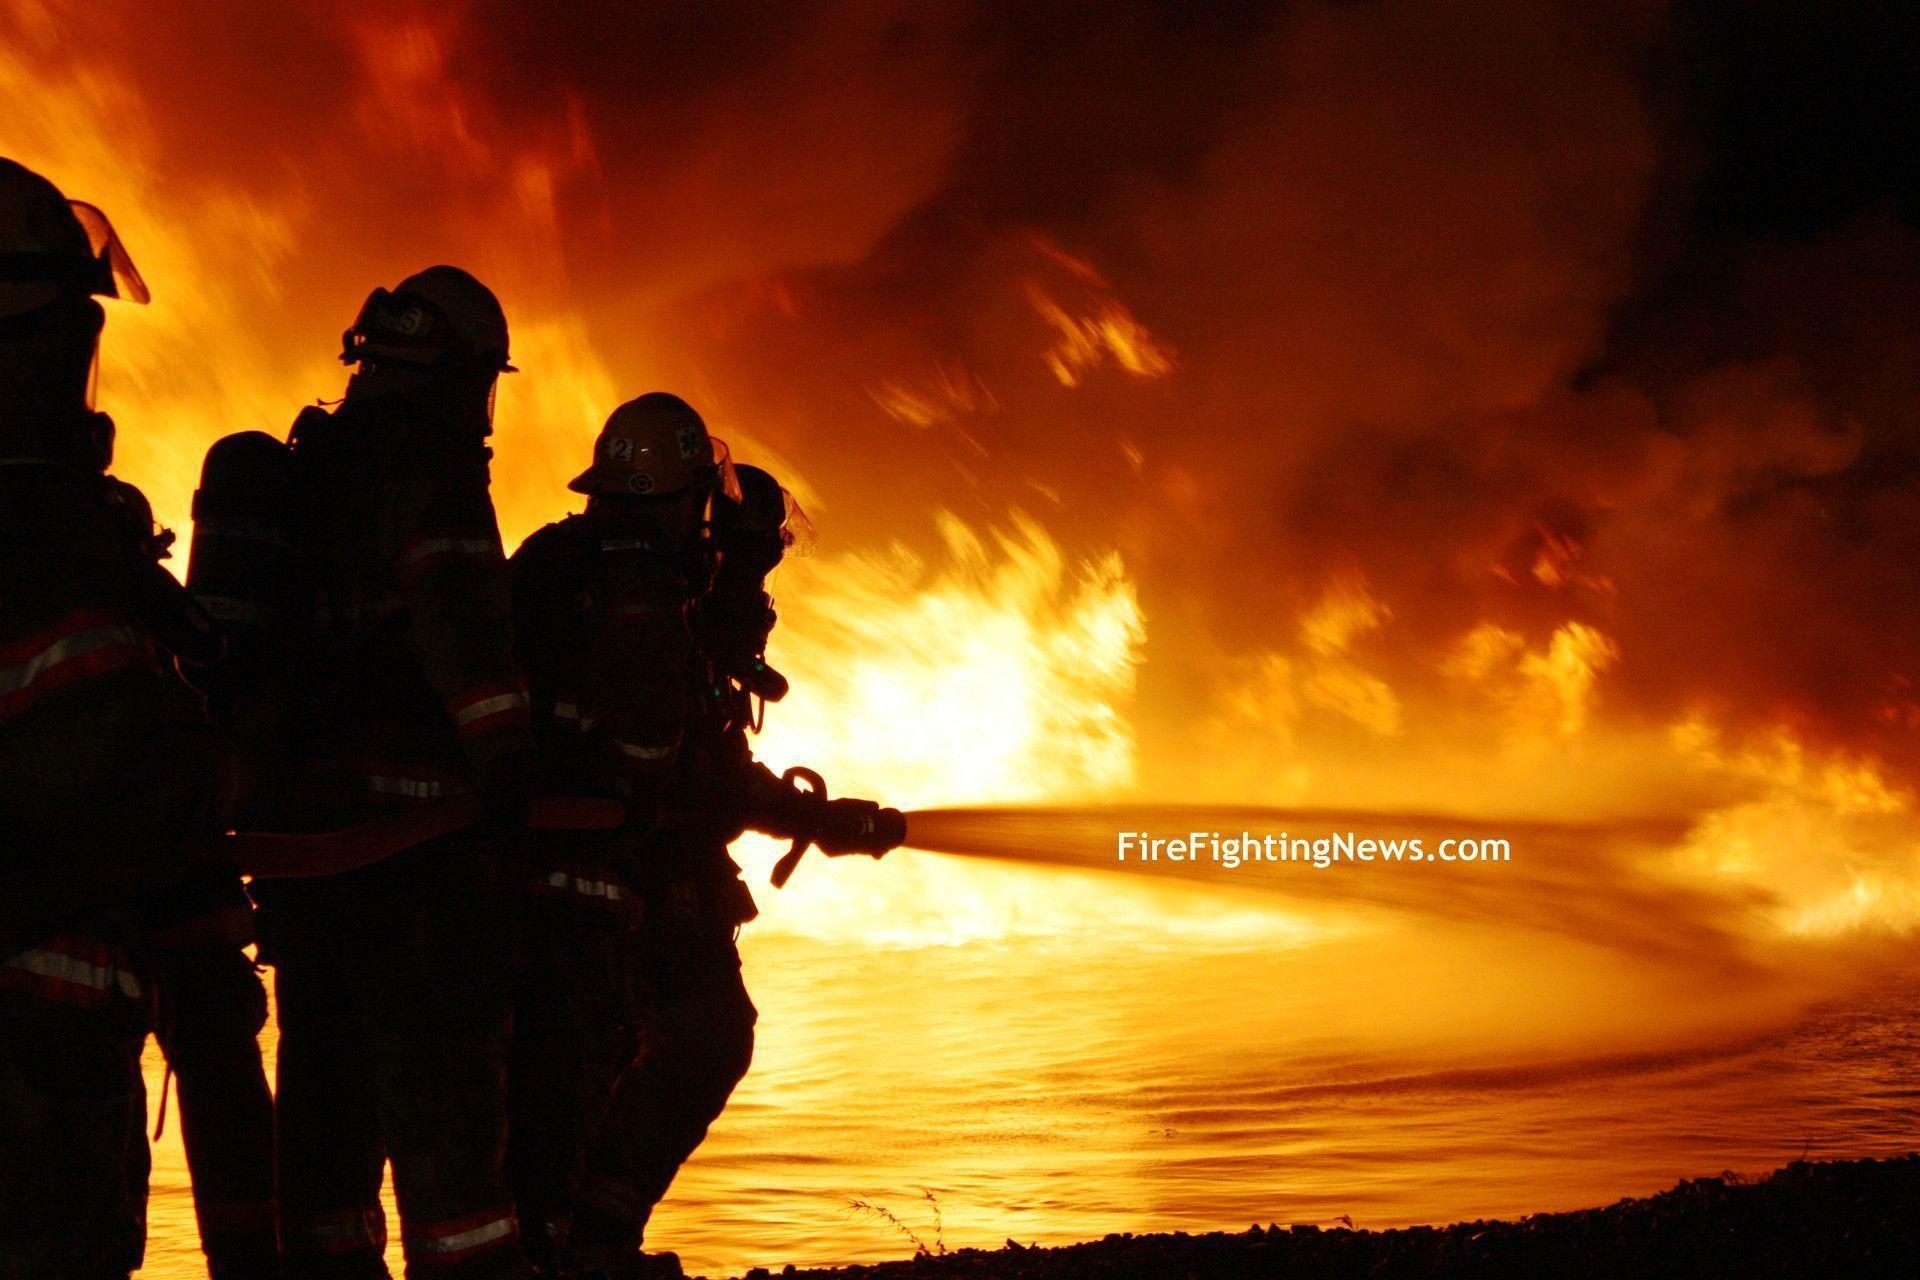 Firefighter Wallpaper Free Download Car Picture